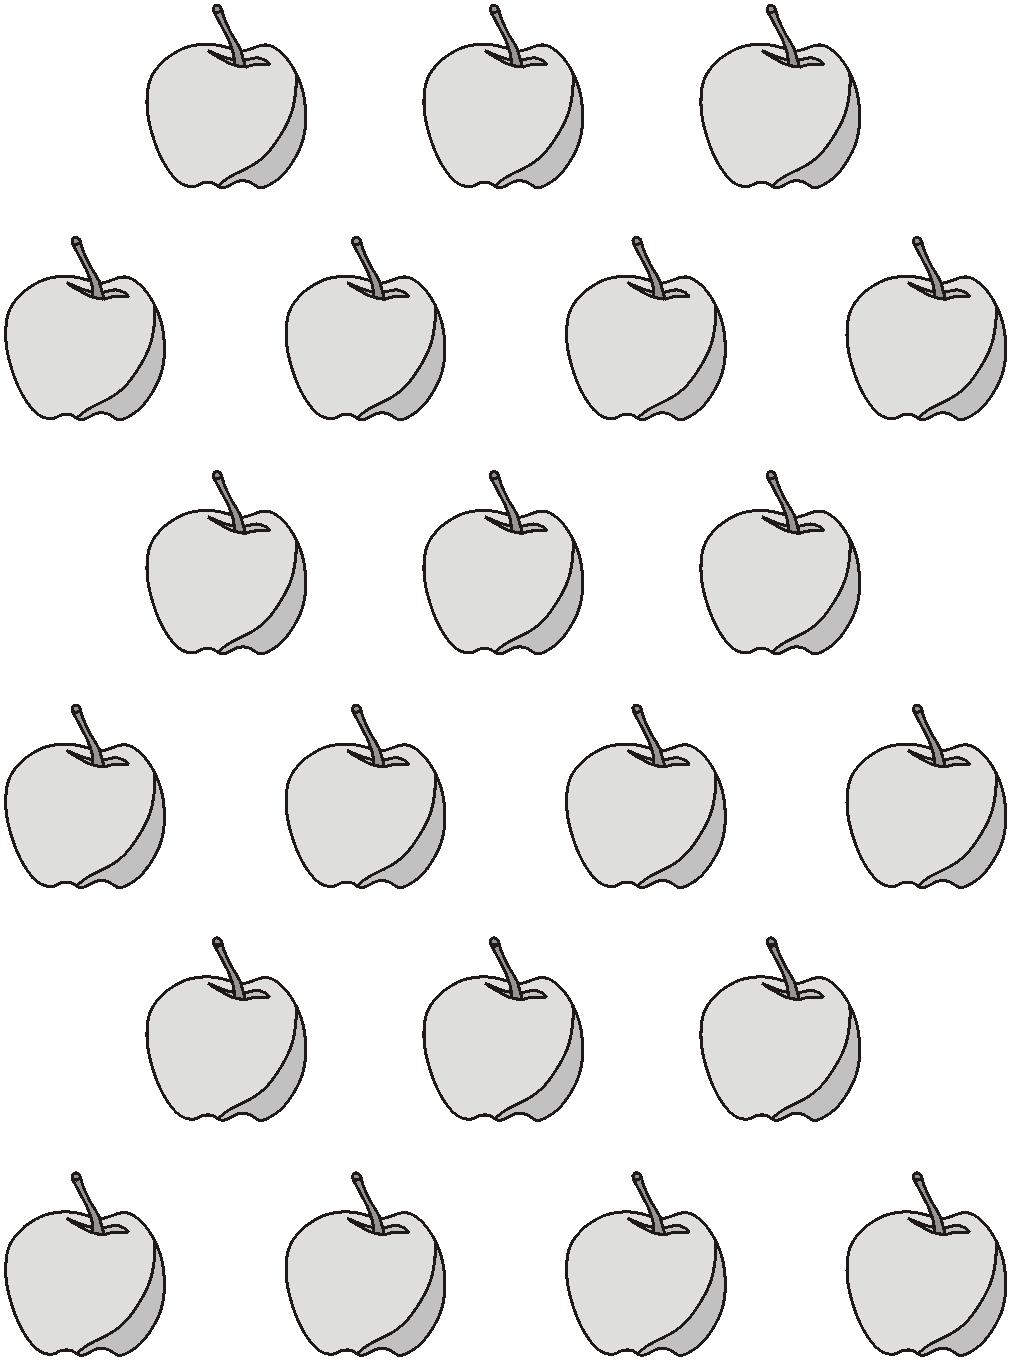 2 Here are 21 apples.